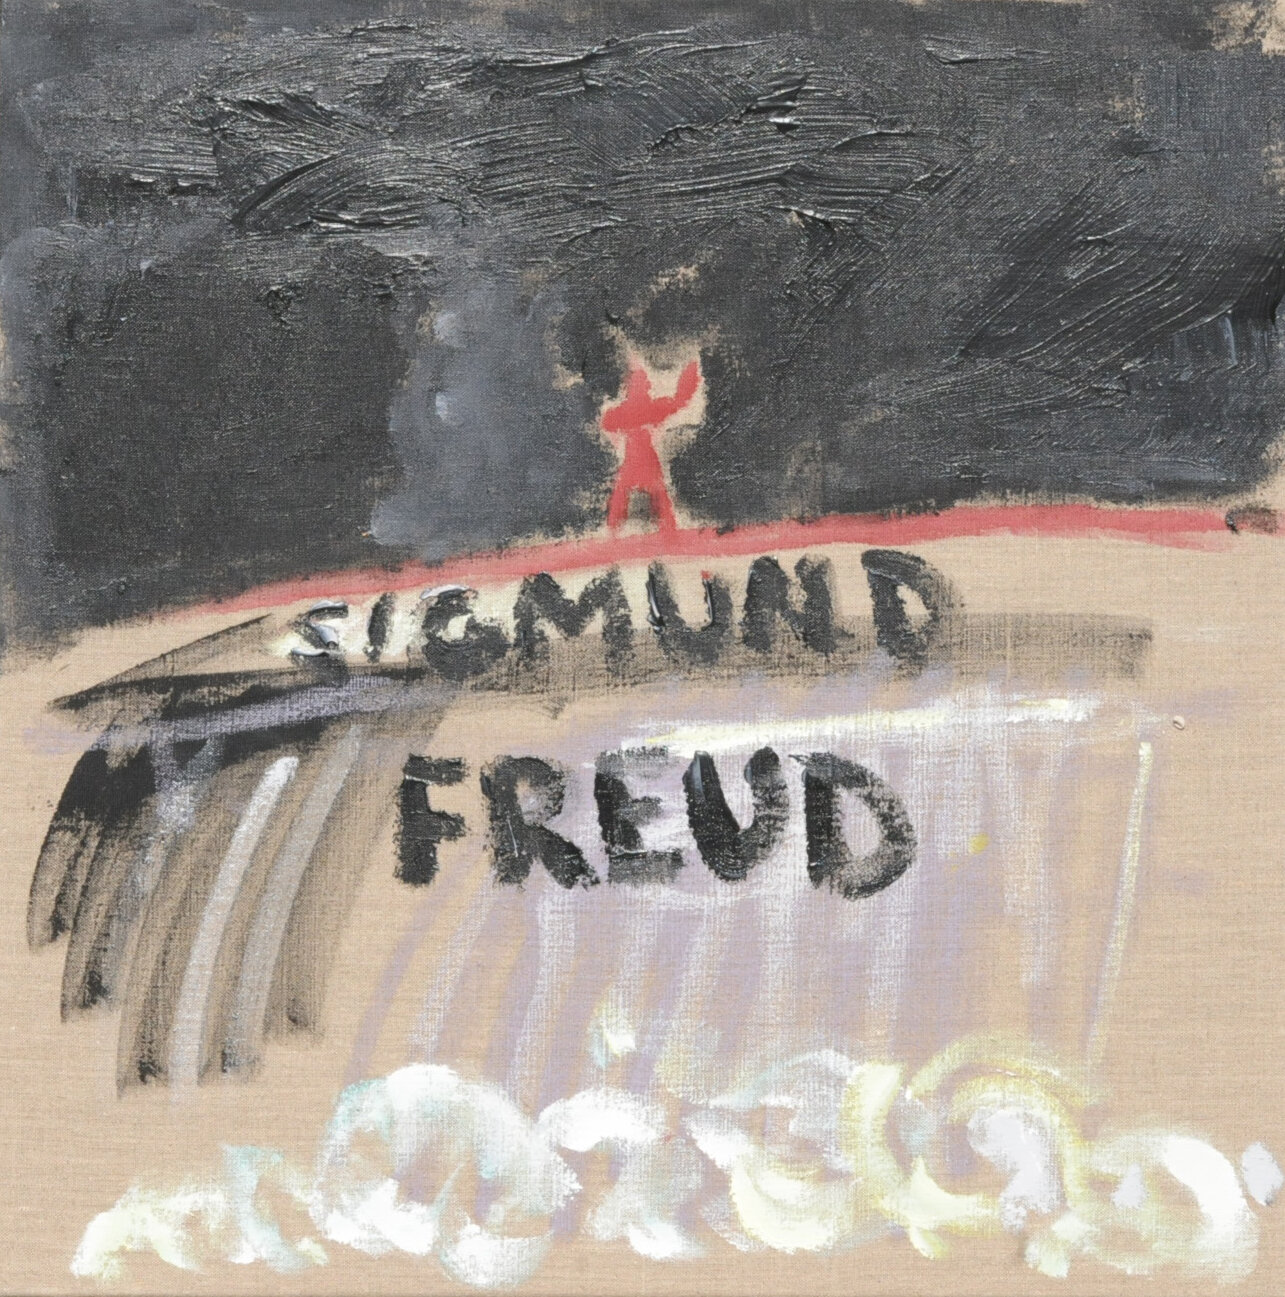  Ironmen Sigmund Freud Acrylic on Linen 24 x 24 inches $2000 Available 